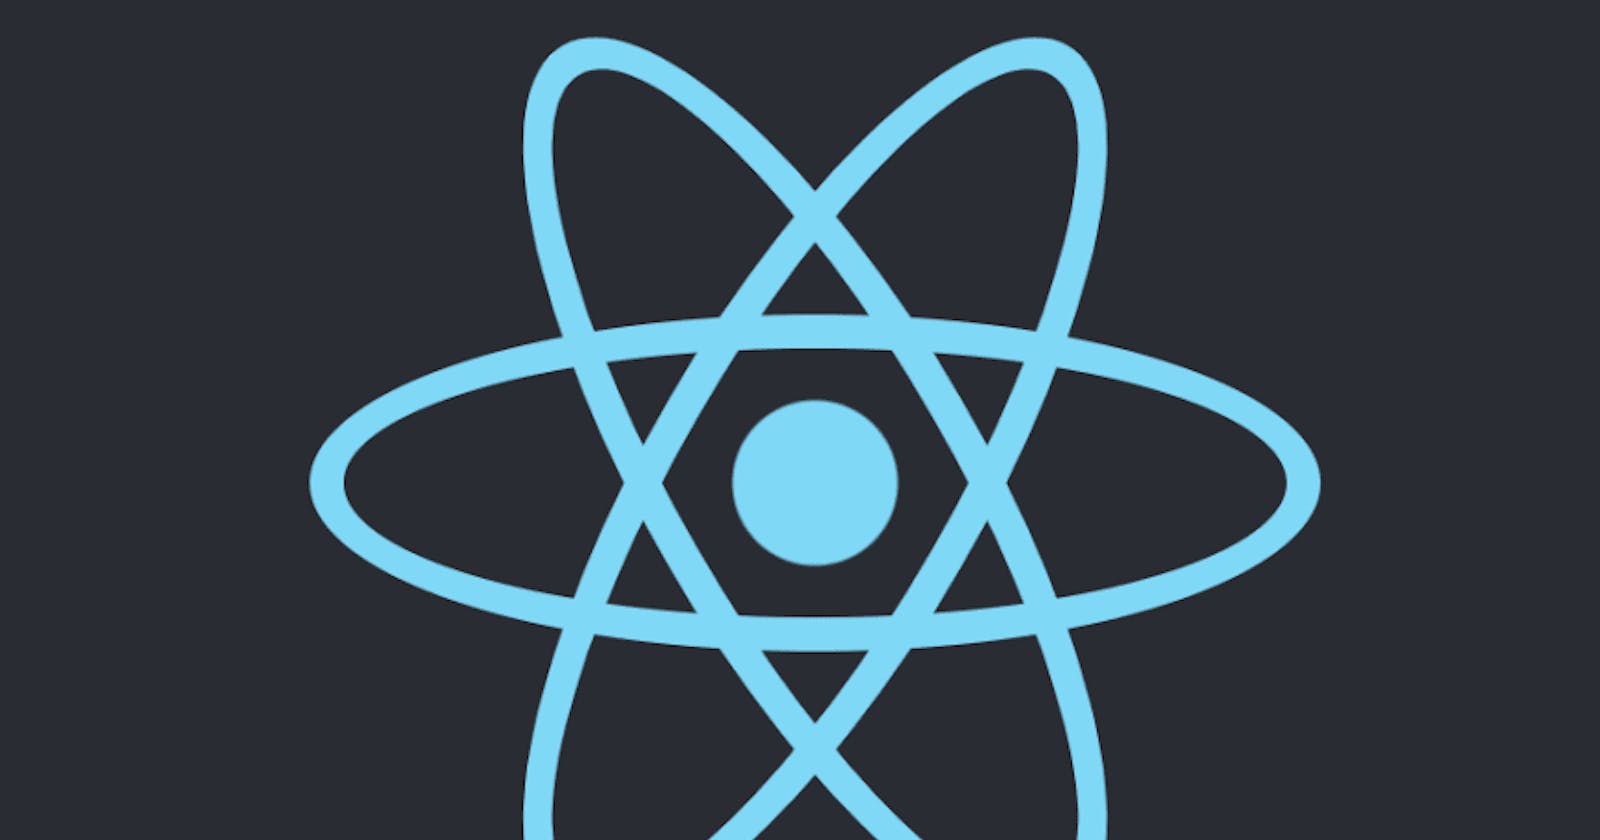 How to create a new app in React.